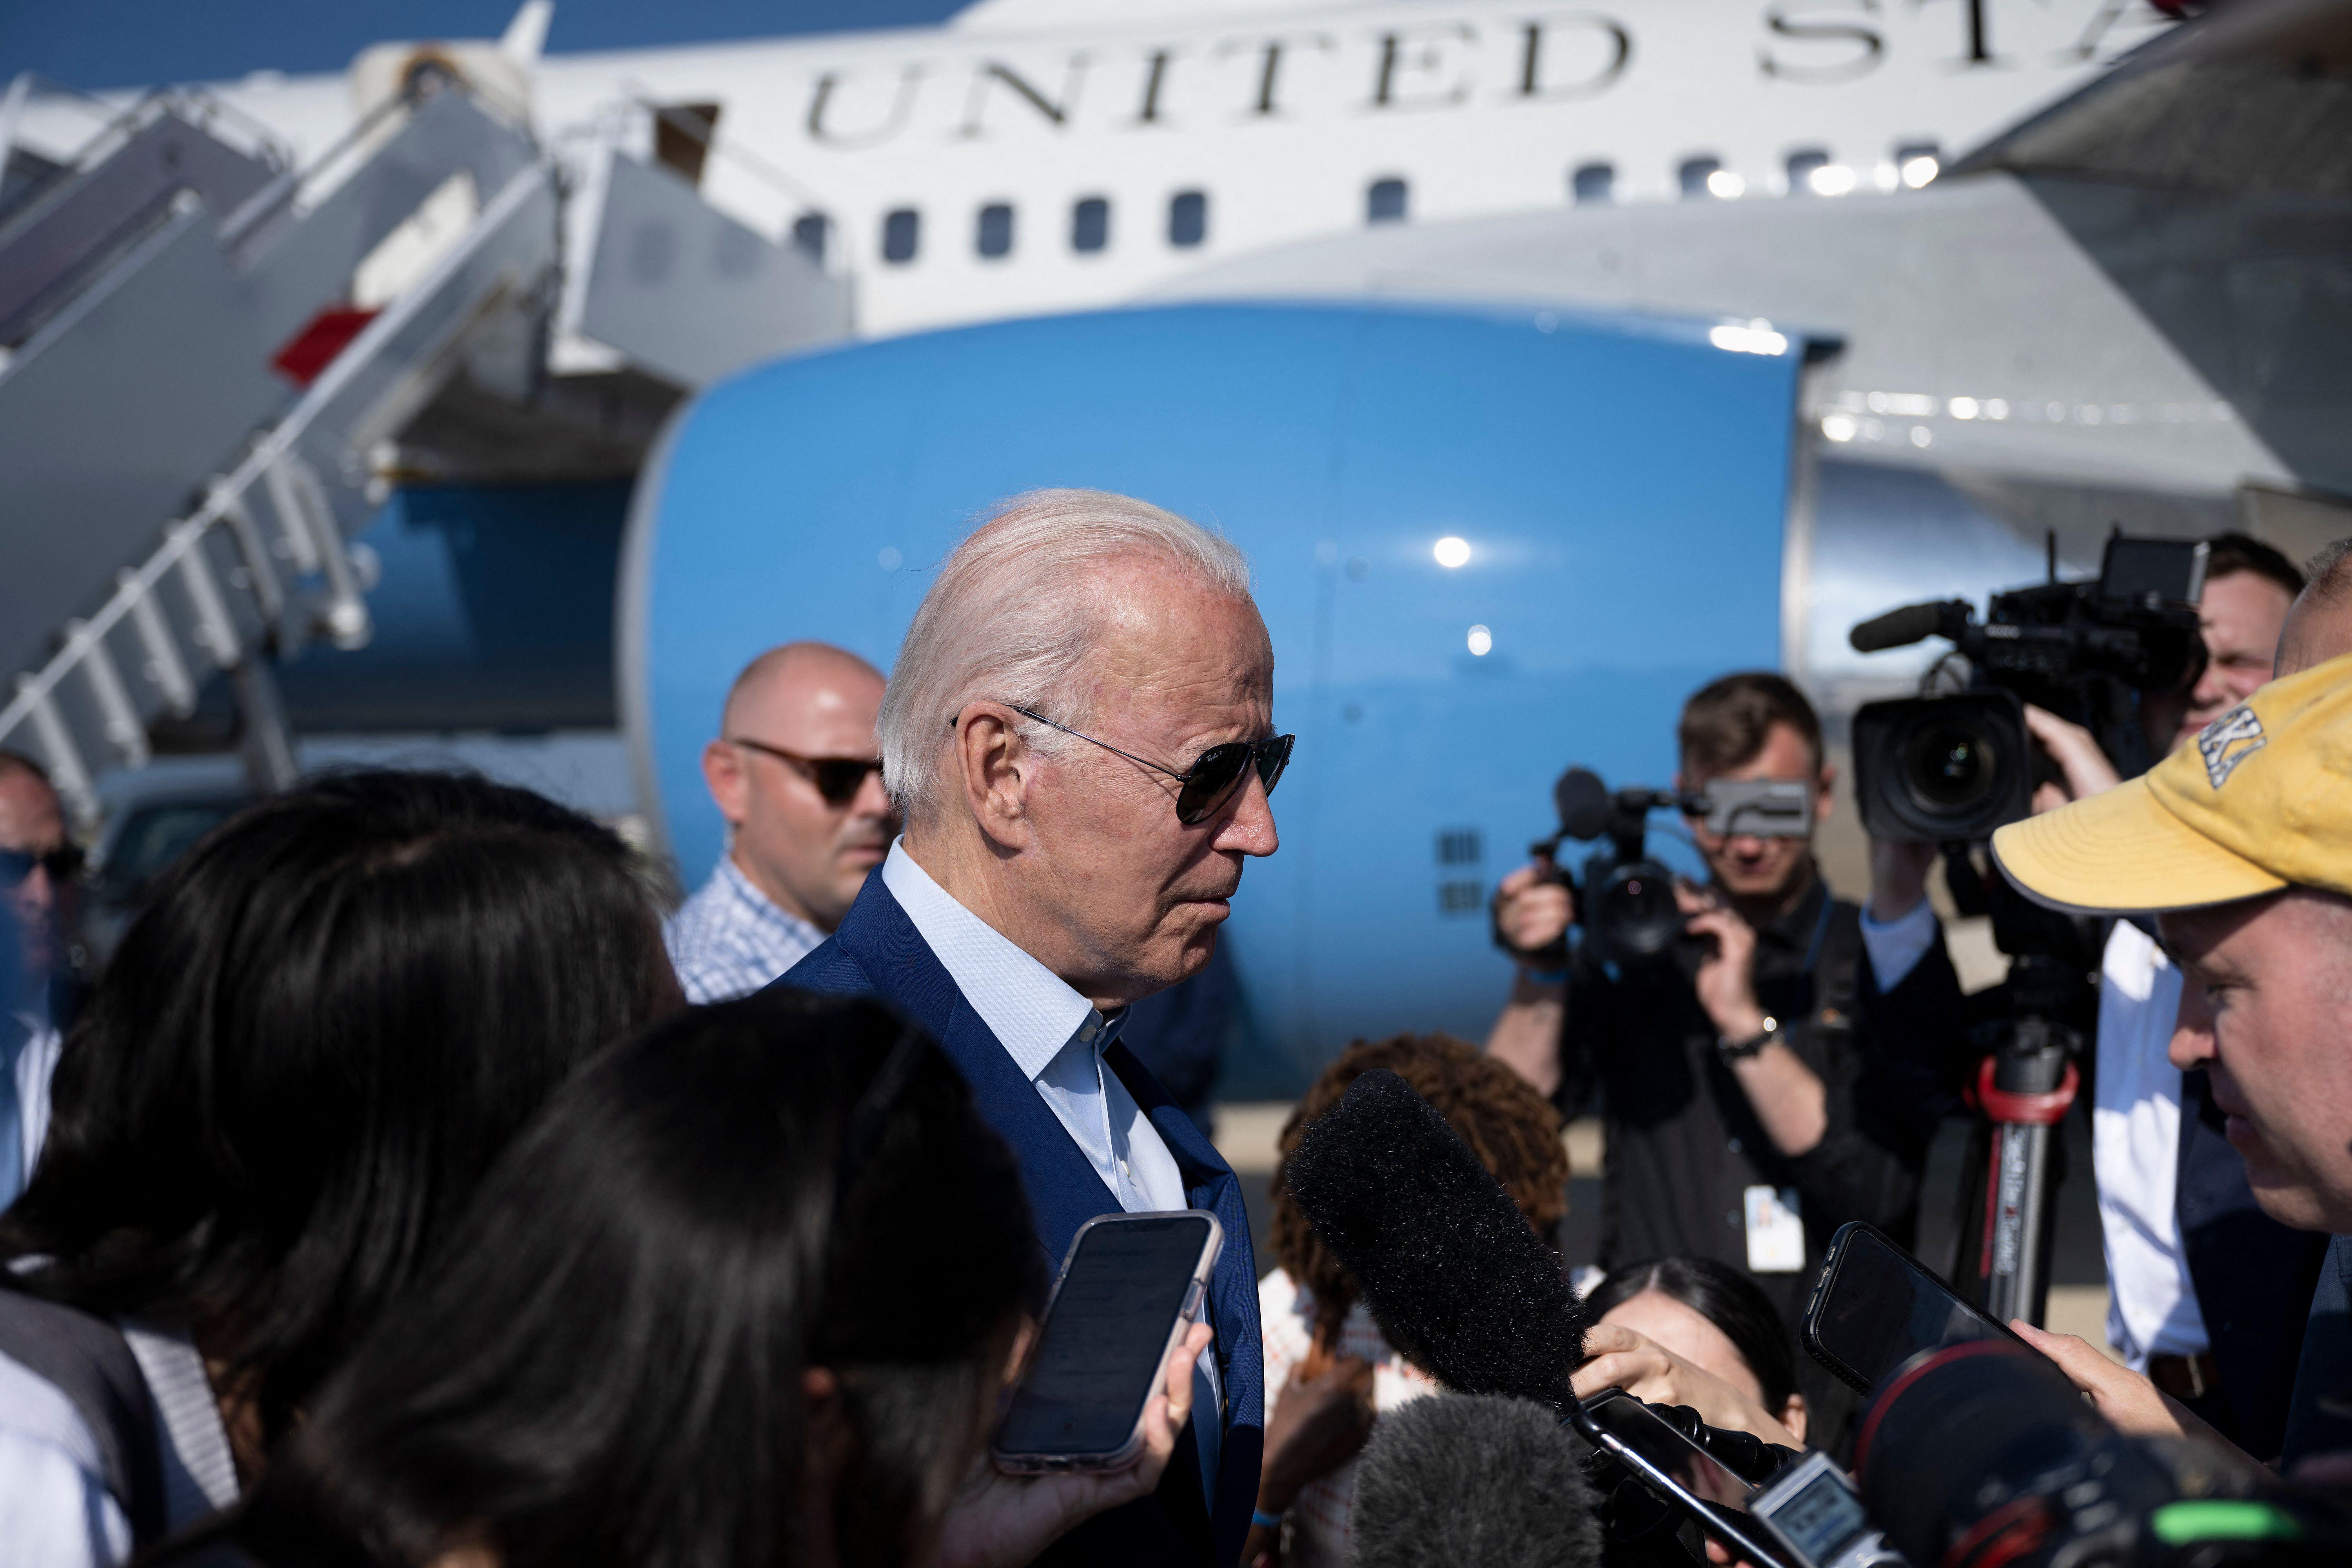 US President Joe Biden speaks to memebrs of the media after disembarking Air Force One at Joint Base Andrews in Maryland on July 20, 2022. - Biden is travelling back to Washington, DC, after delivering remarks on the climate crisis in Somerset, Massachusetts. (Photo by Brendan Smialowski / AFP) (Photo by BRENDAN SMIALOWSKI/AFP via Getty Images)